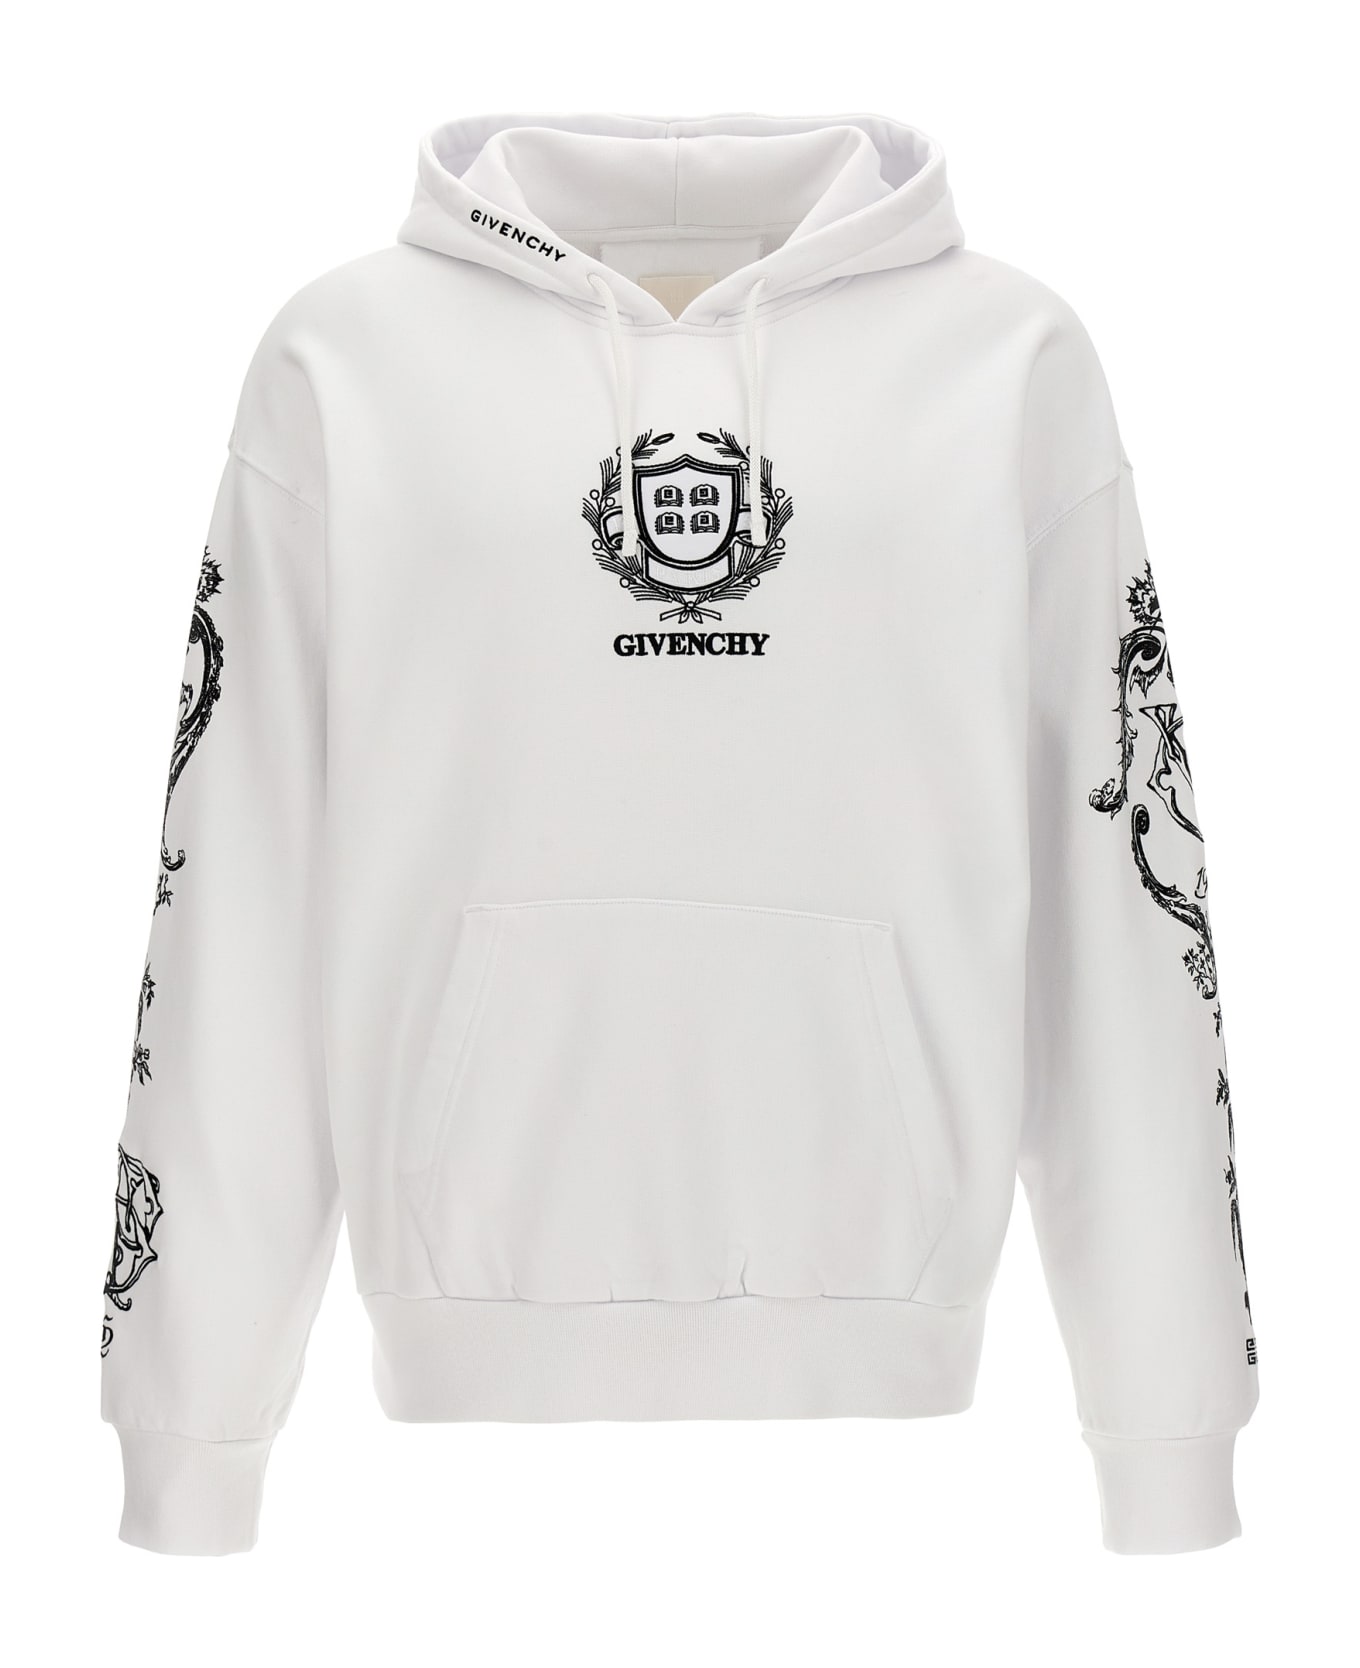 Givenchy Embroidery And Print MMW - White/Black